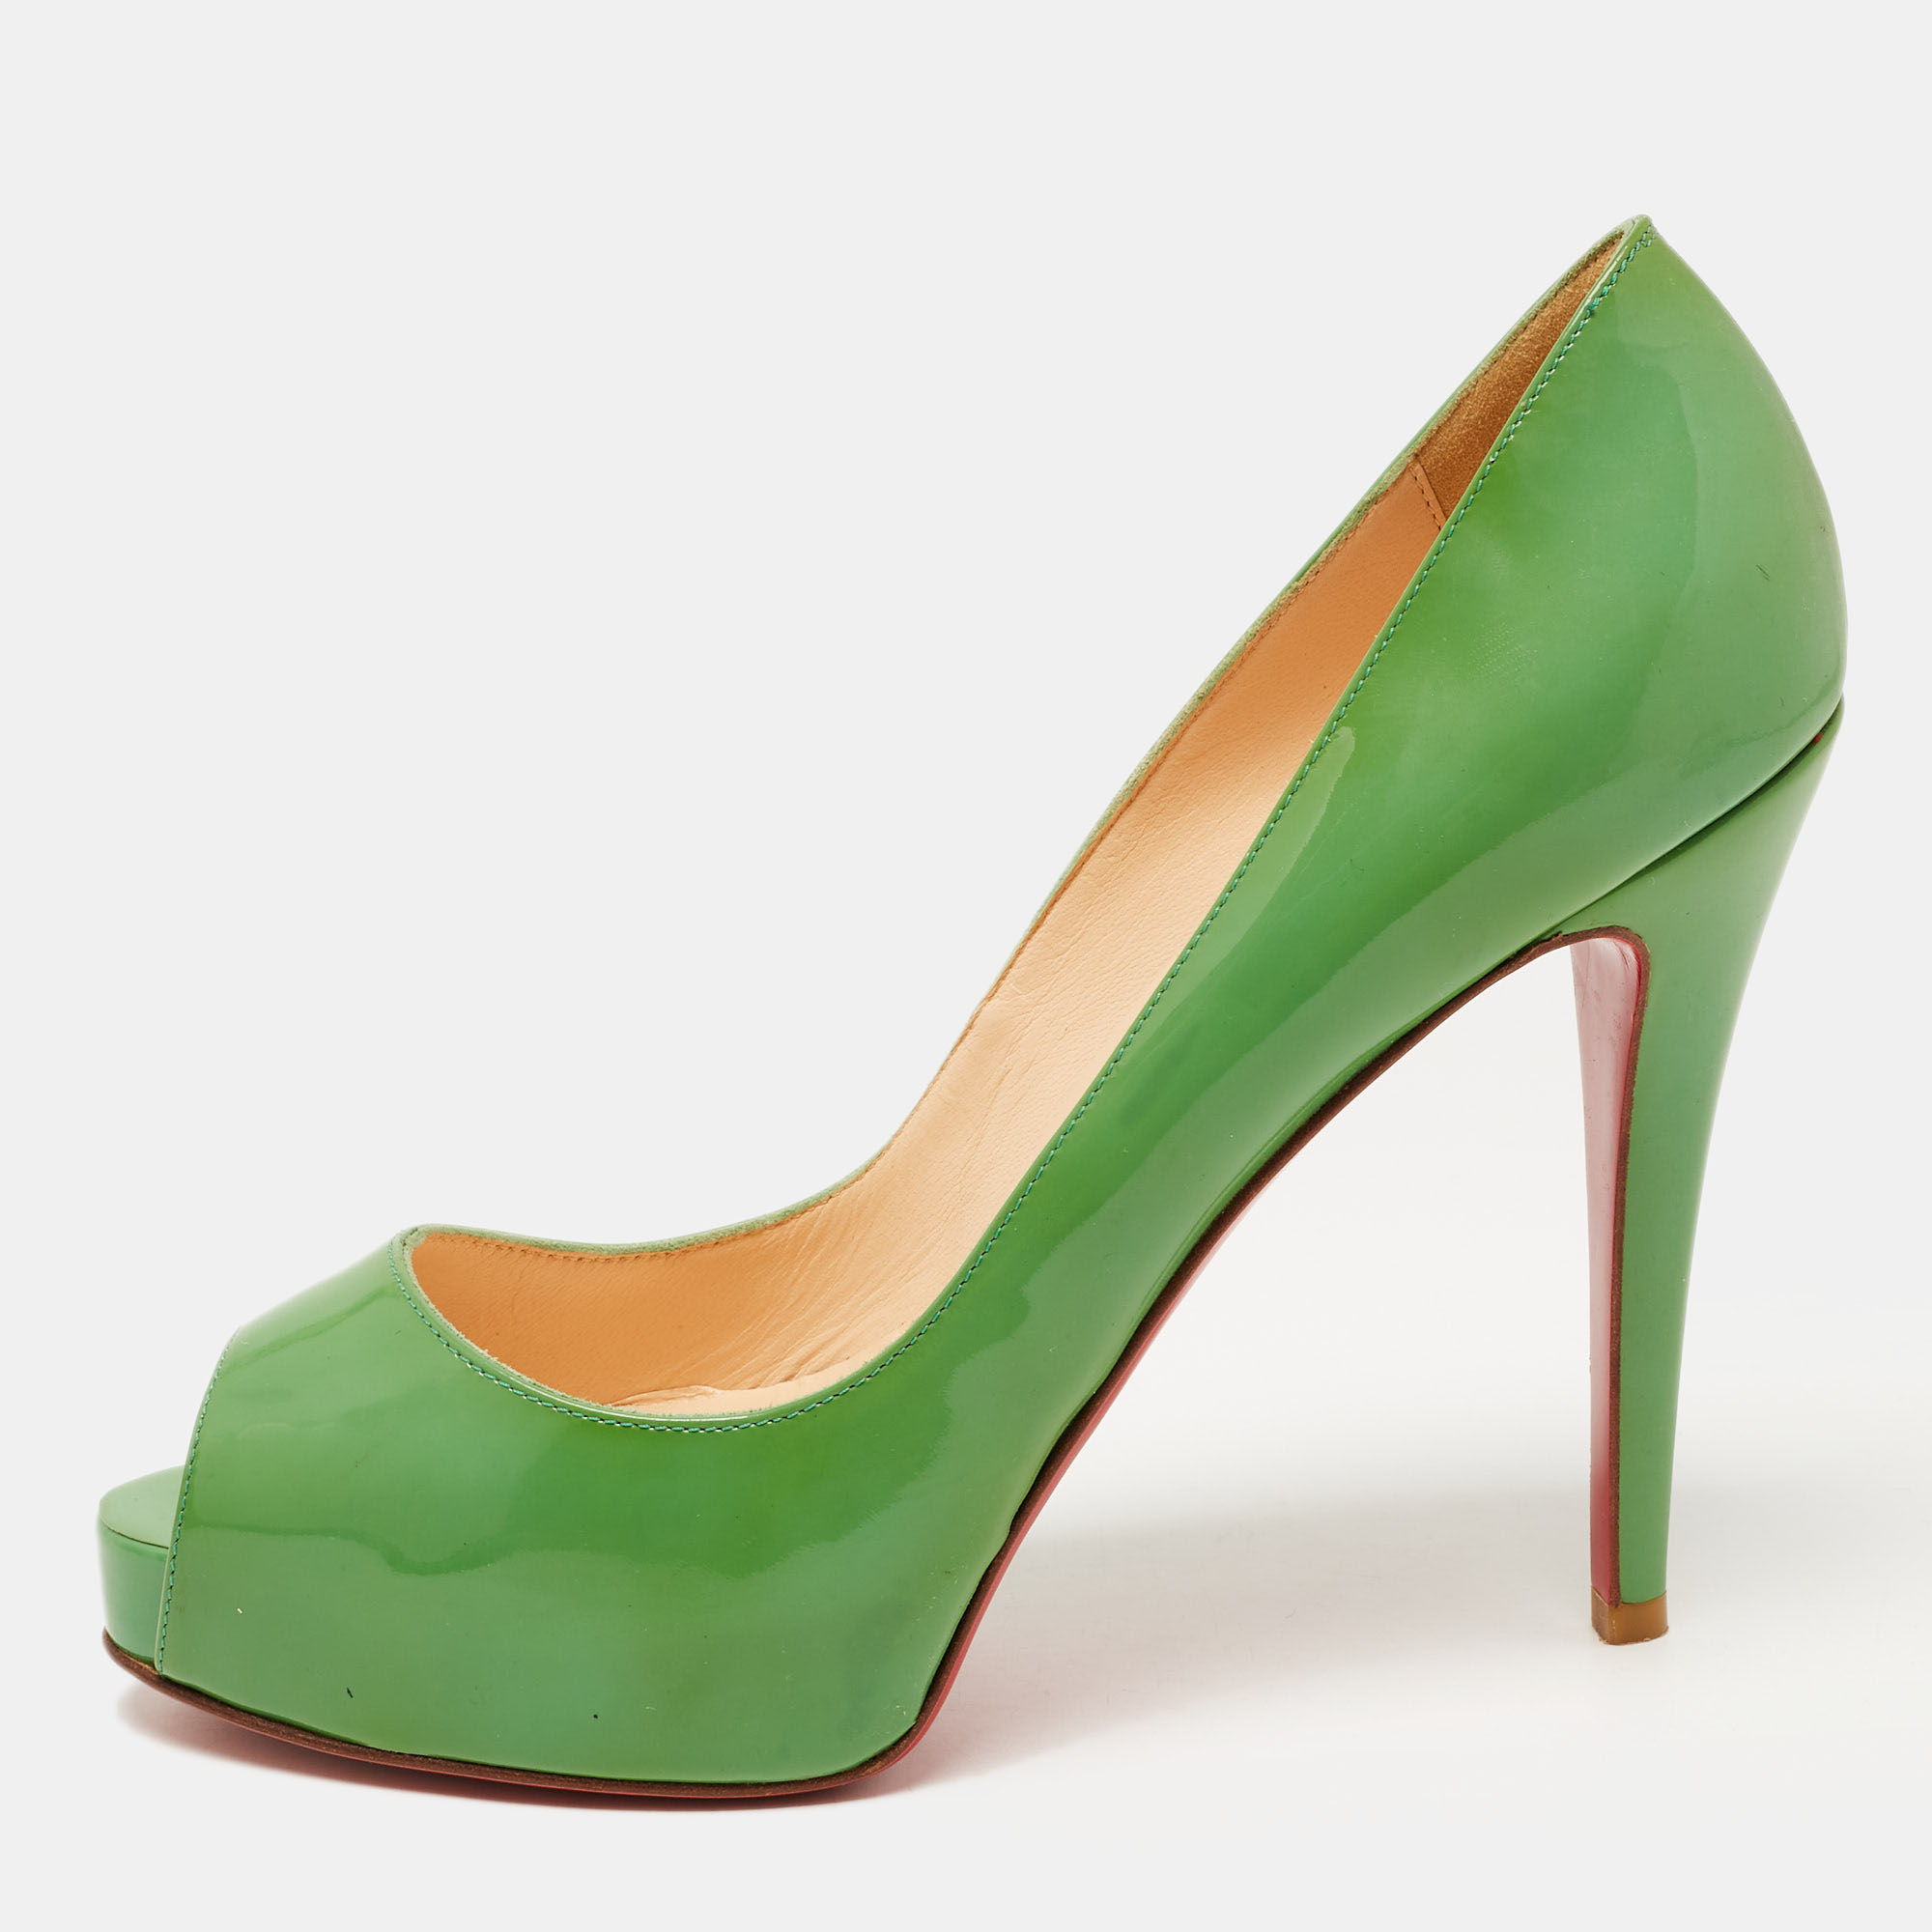 Christian louboutin green patent leather very prive pumps size 38.5